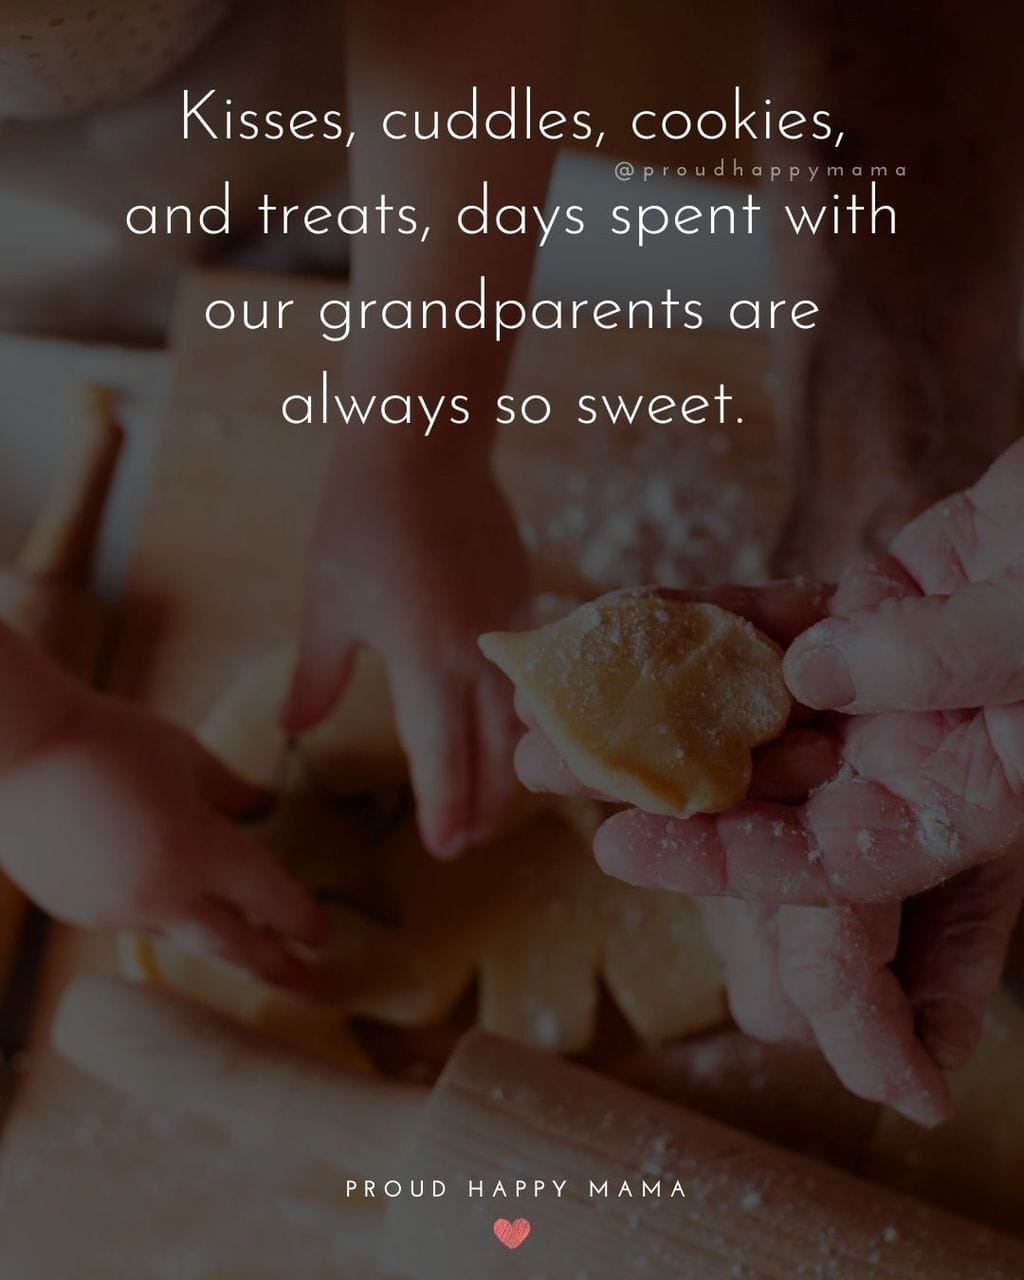 Great Grandparent Quotes | Kisses, cuddles, cookies, and treats, days spent with our grandparents are always so sweet.